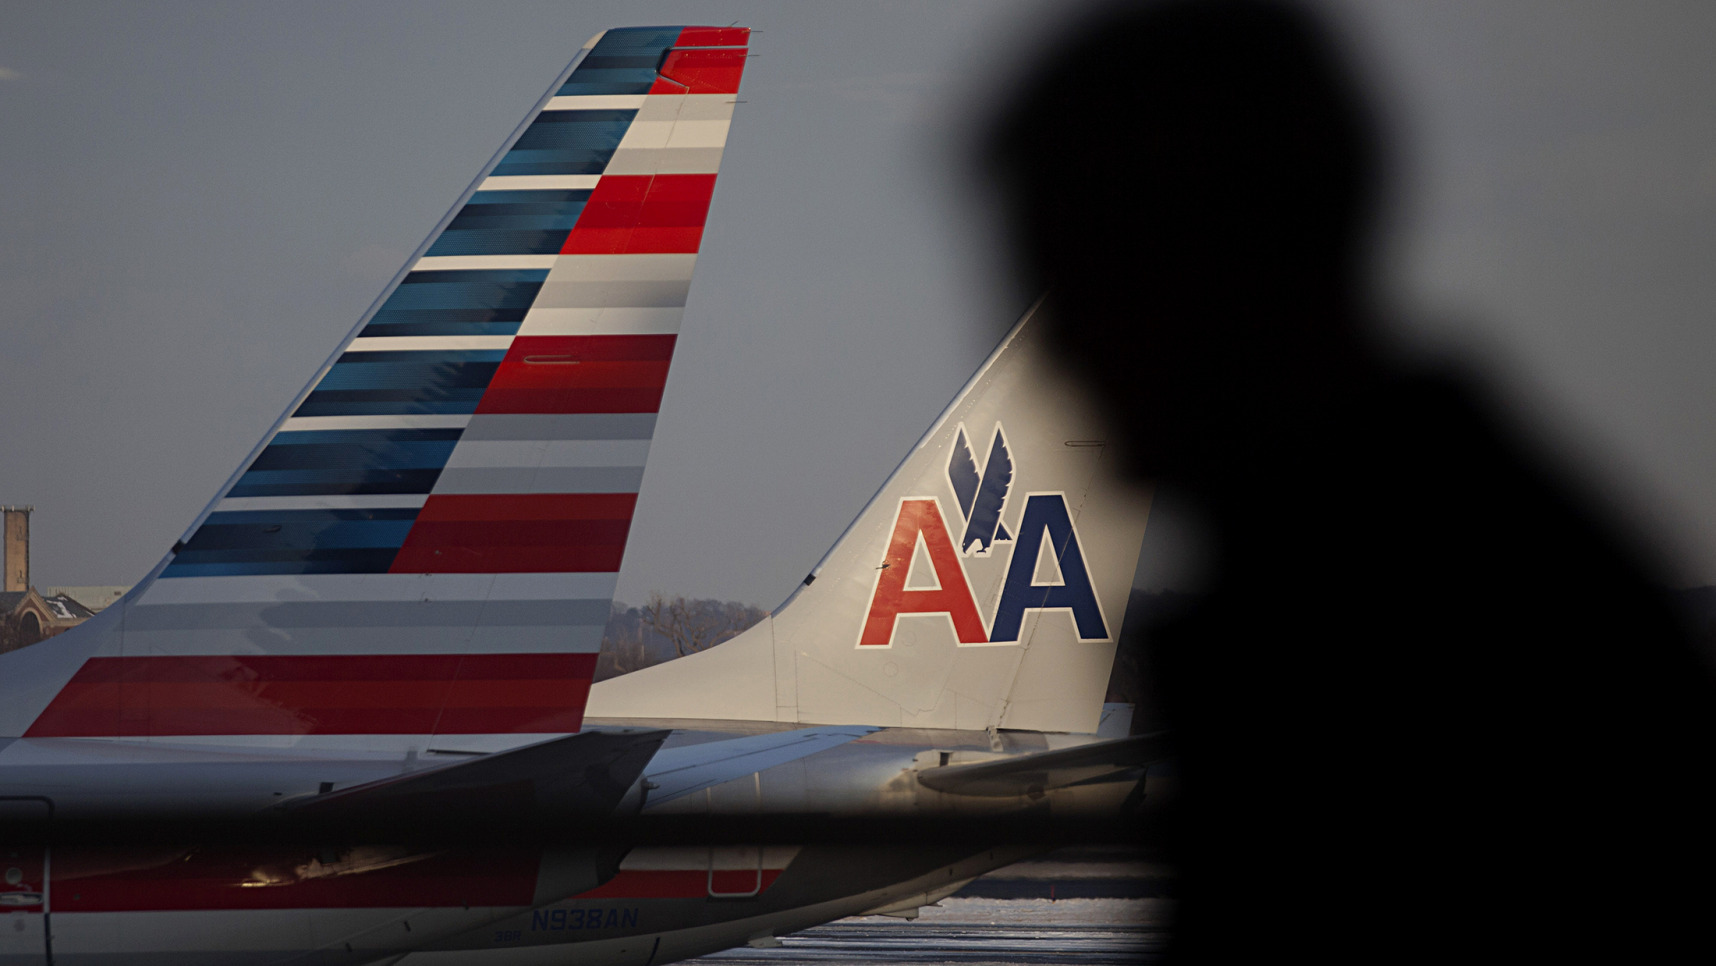 American Airlines Made the Wrong Bet by Doubling Regional Pilot